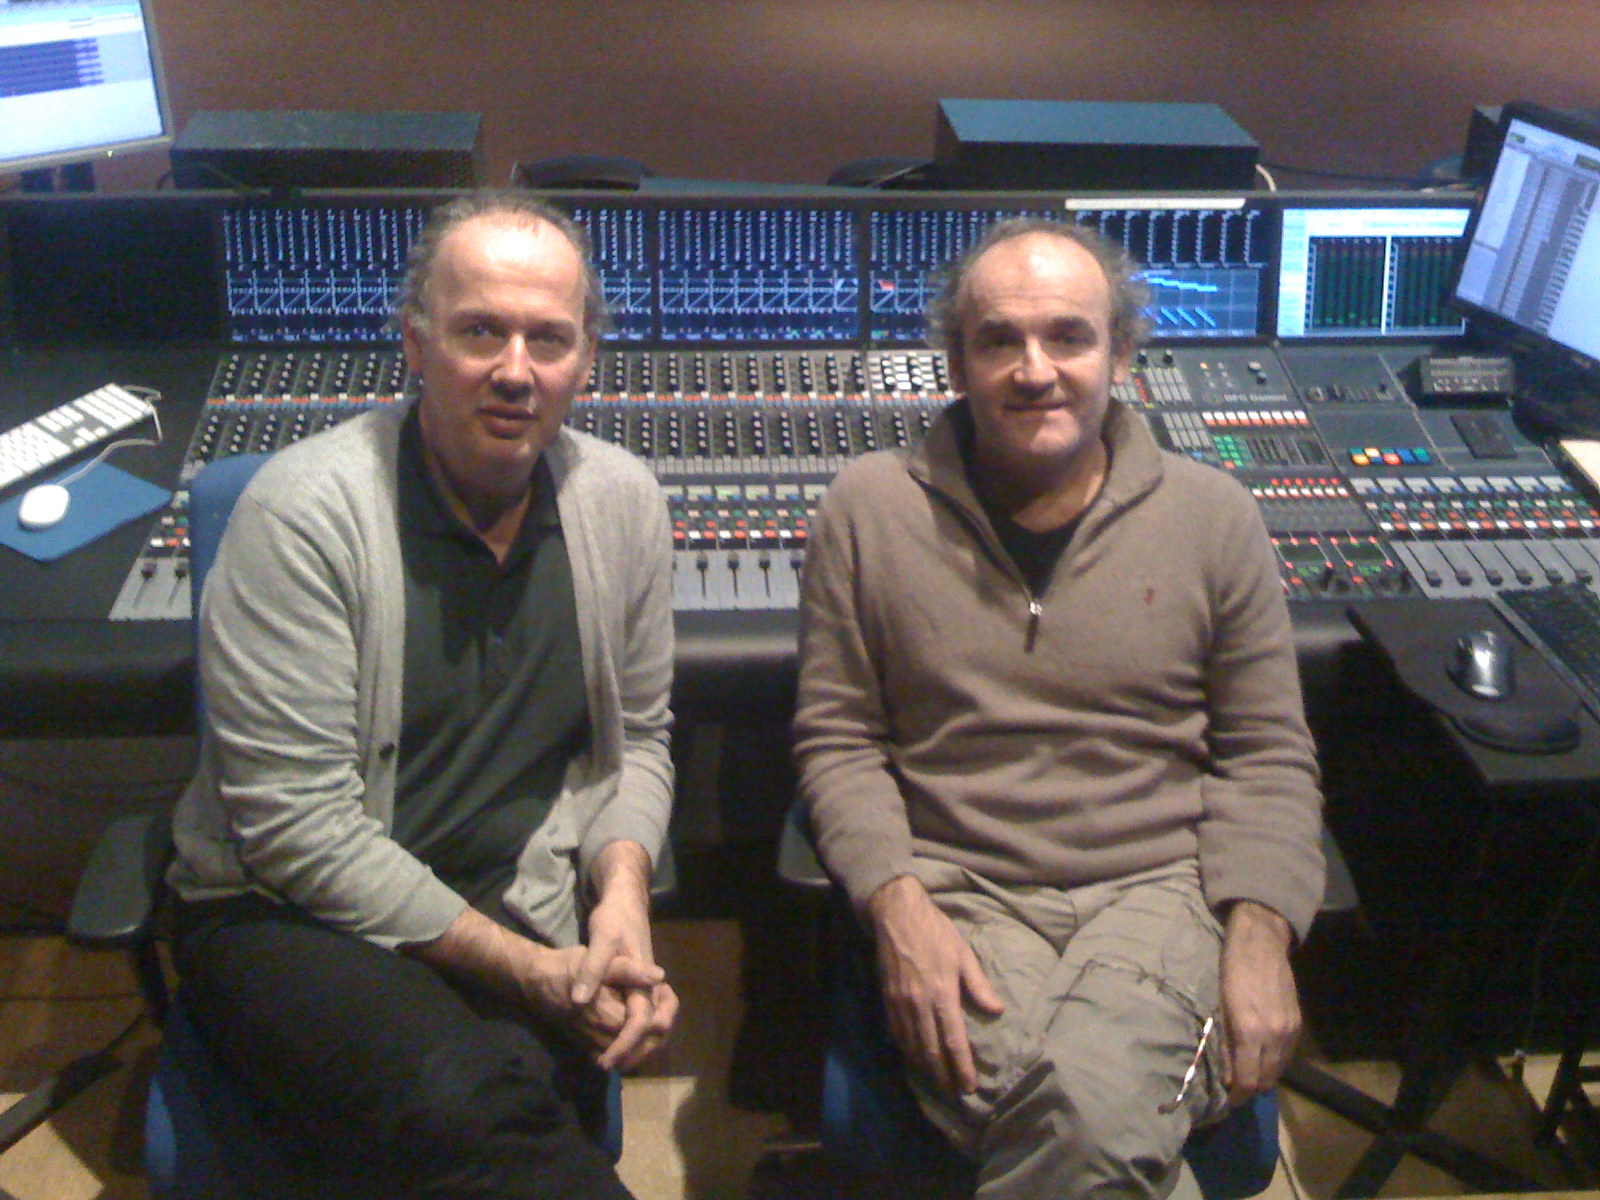 Peter Warnier and Bruno Tarriere mixing at cinephase Paris 'RU There' nov. 09